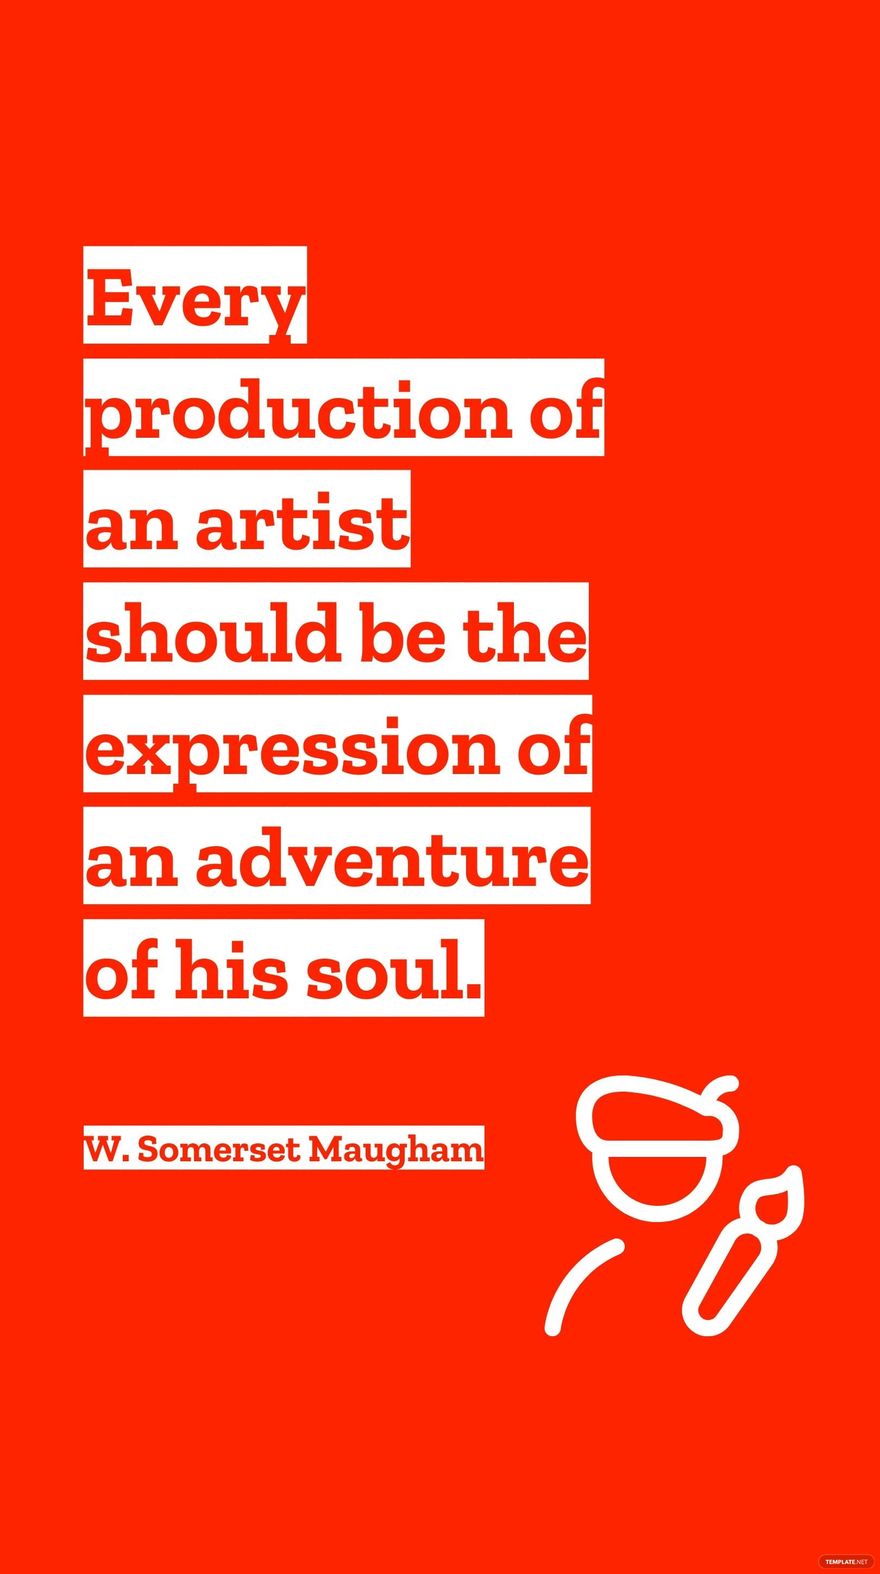 W. Somerset Maugham - Every production of an artist should be the expression of an adventure of his soul.